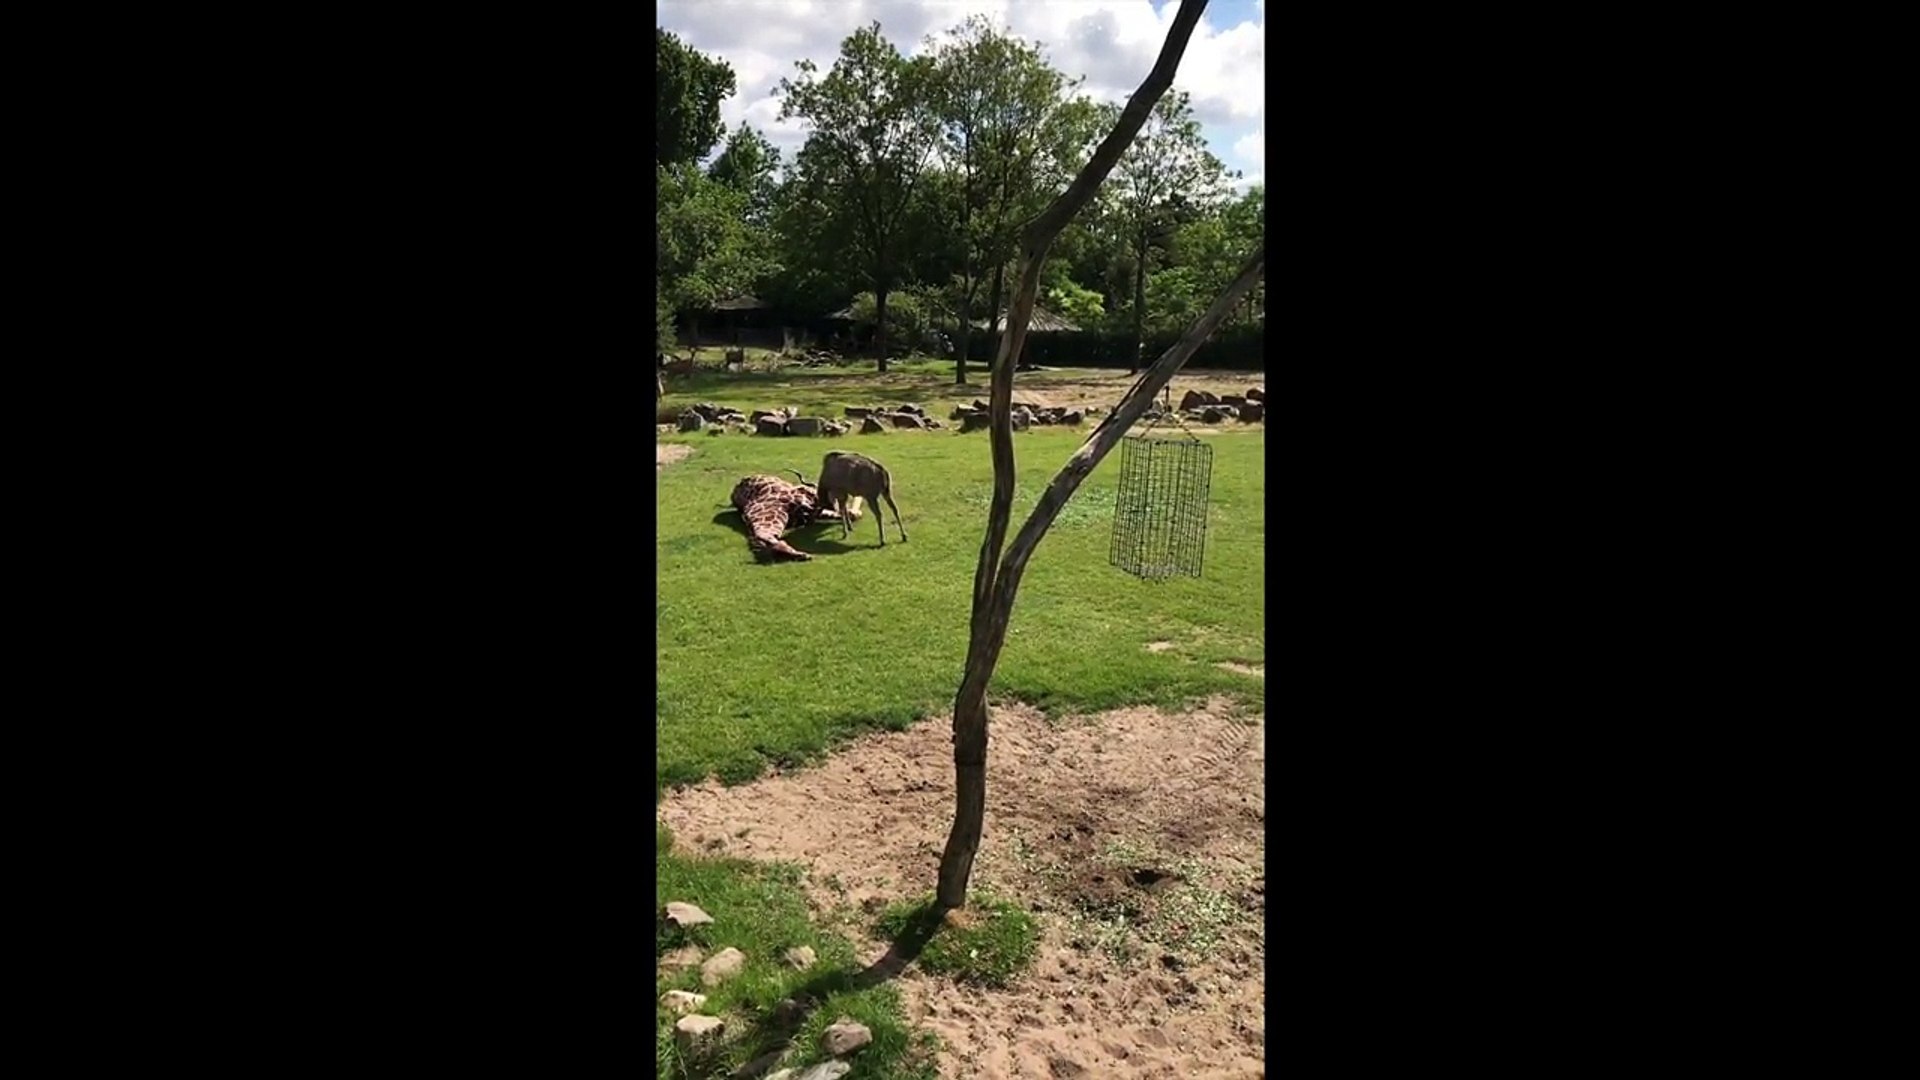 A giraffe attacked by a antelope at the Rotterdam Zoo